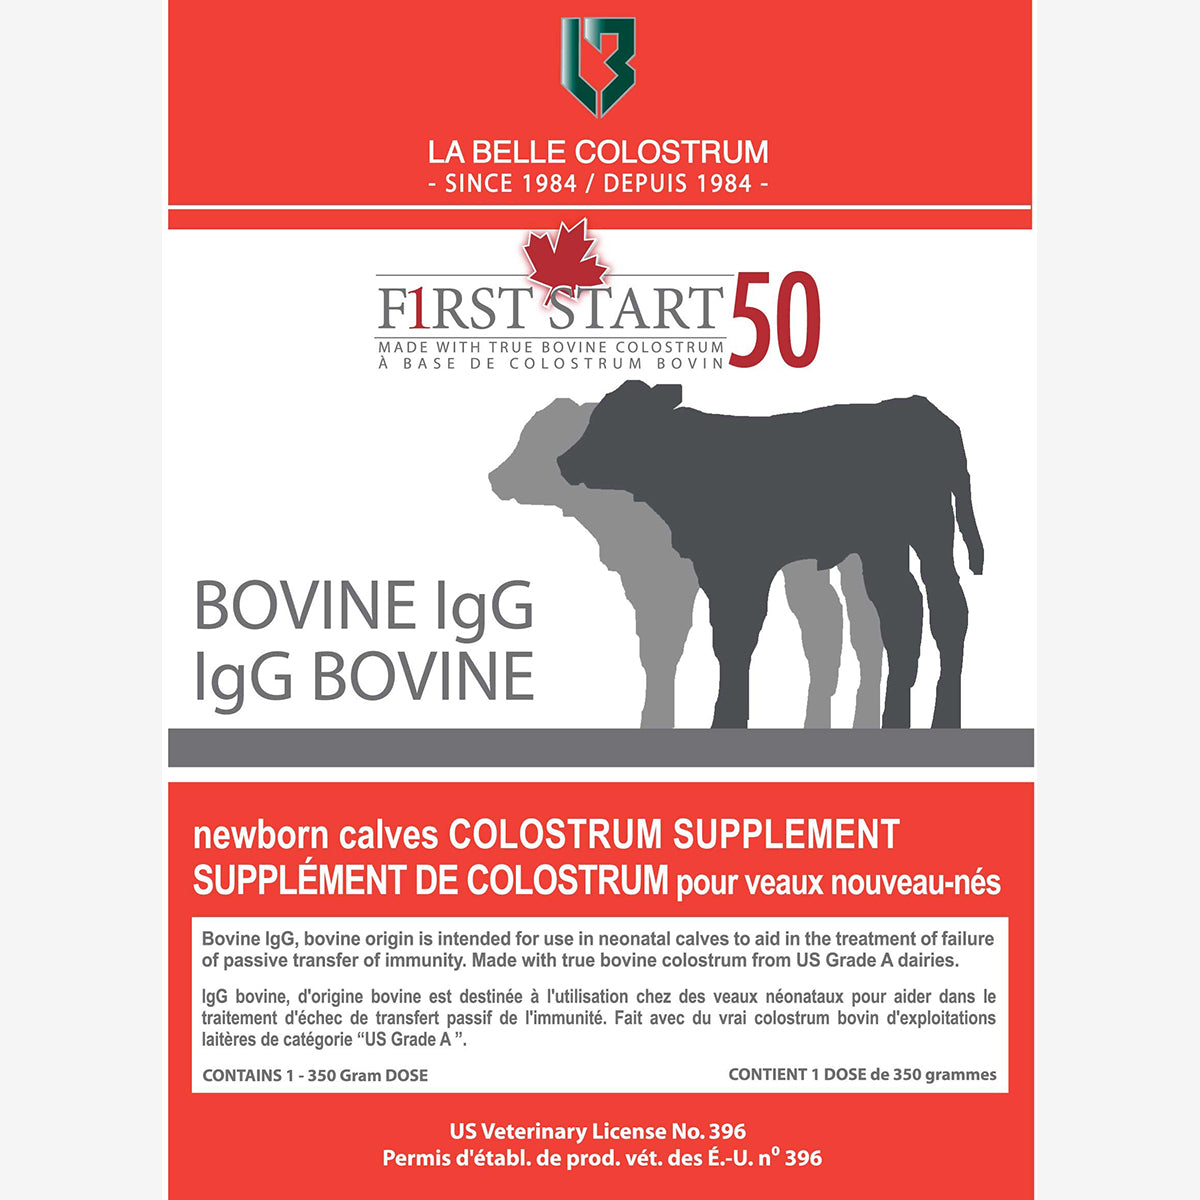 F1RST START 50 Bovine IgG Dry Colostrum - 1 Dose 350g Package - Critter Country Supply Ltd.